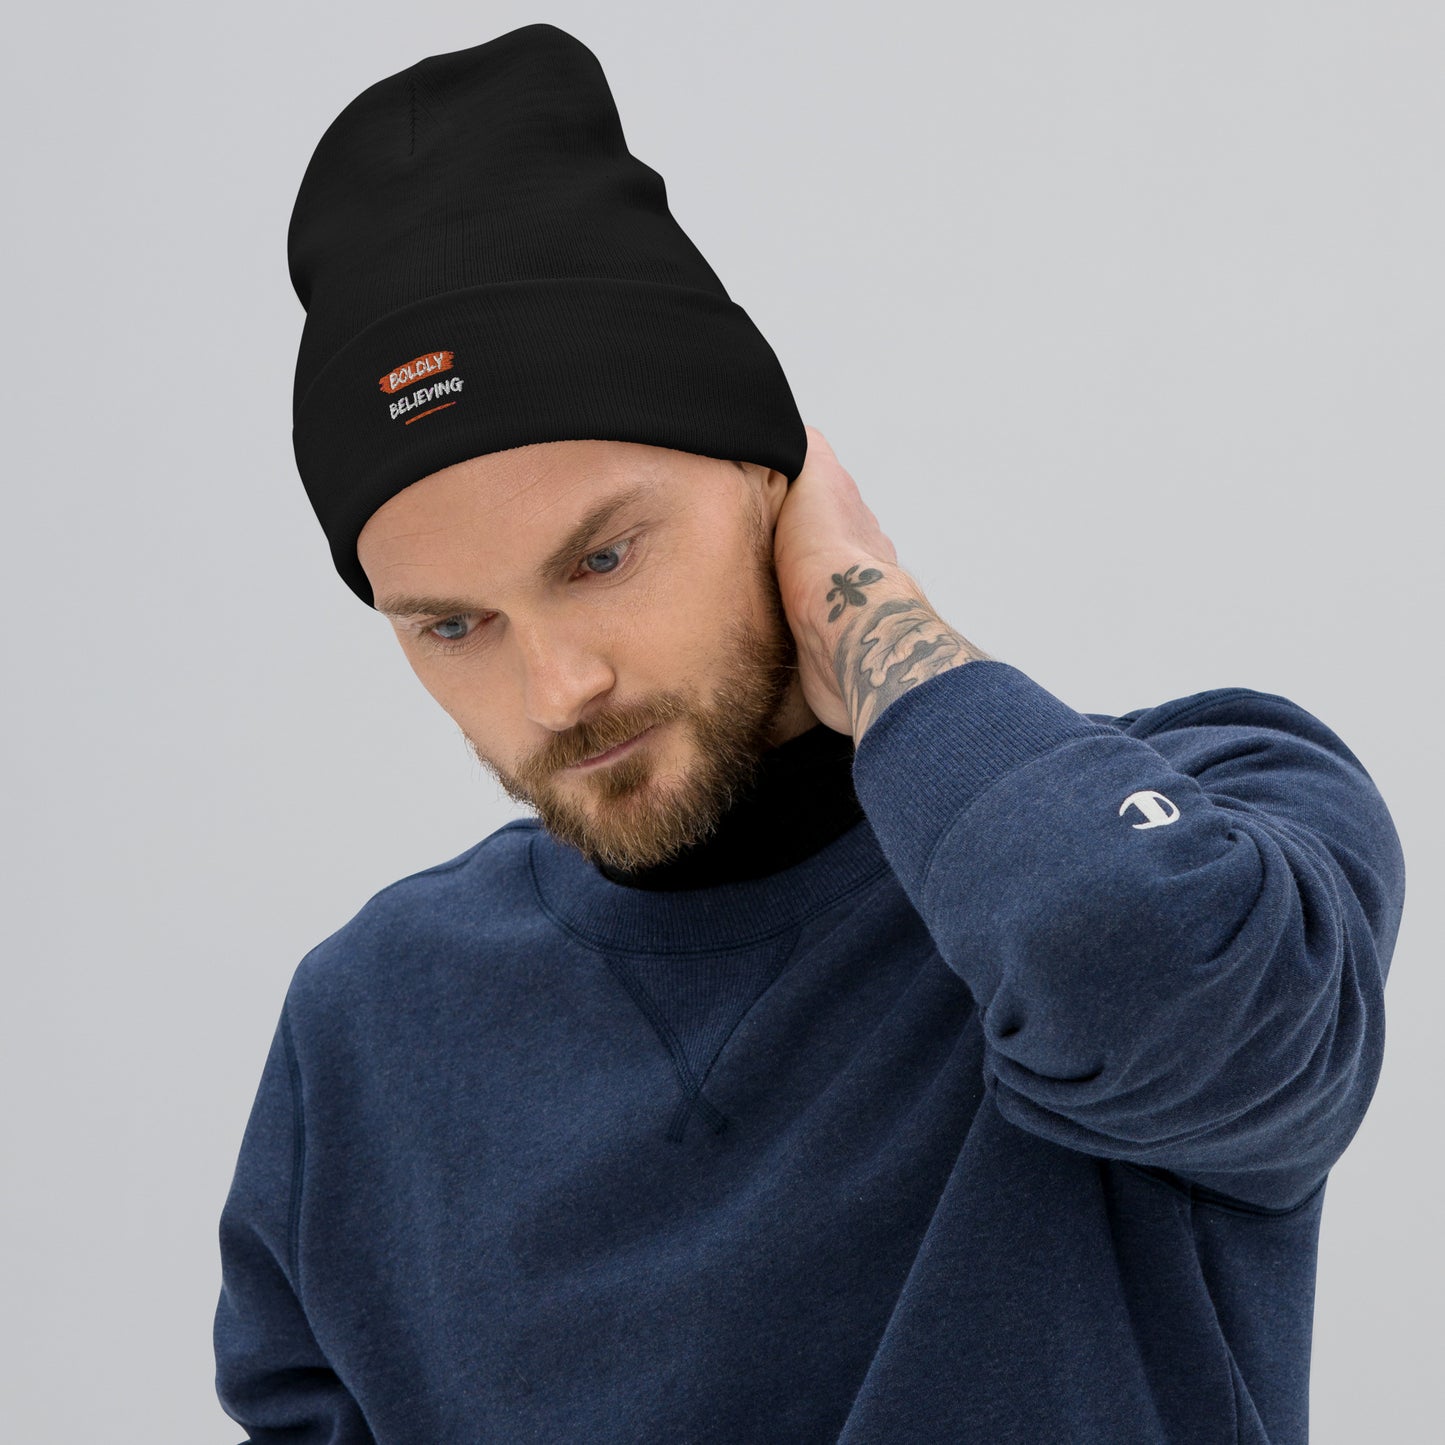 Embroidered Beanie - Boldly Believing